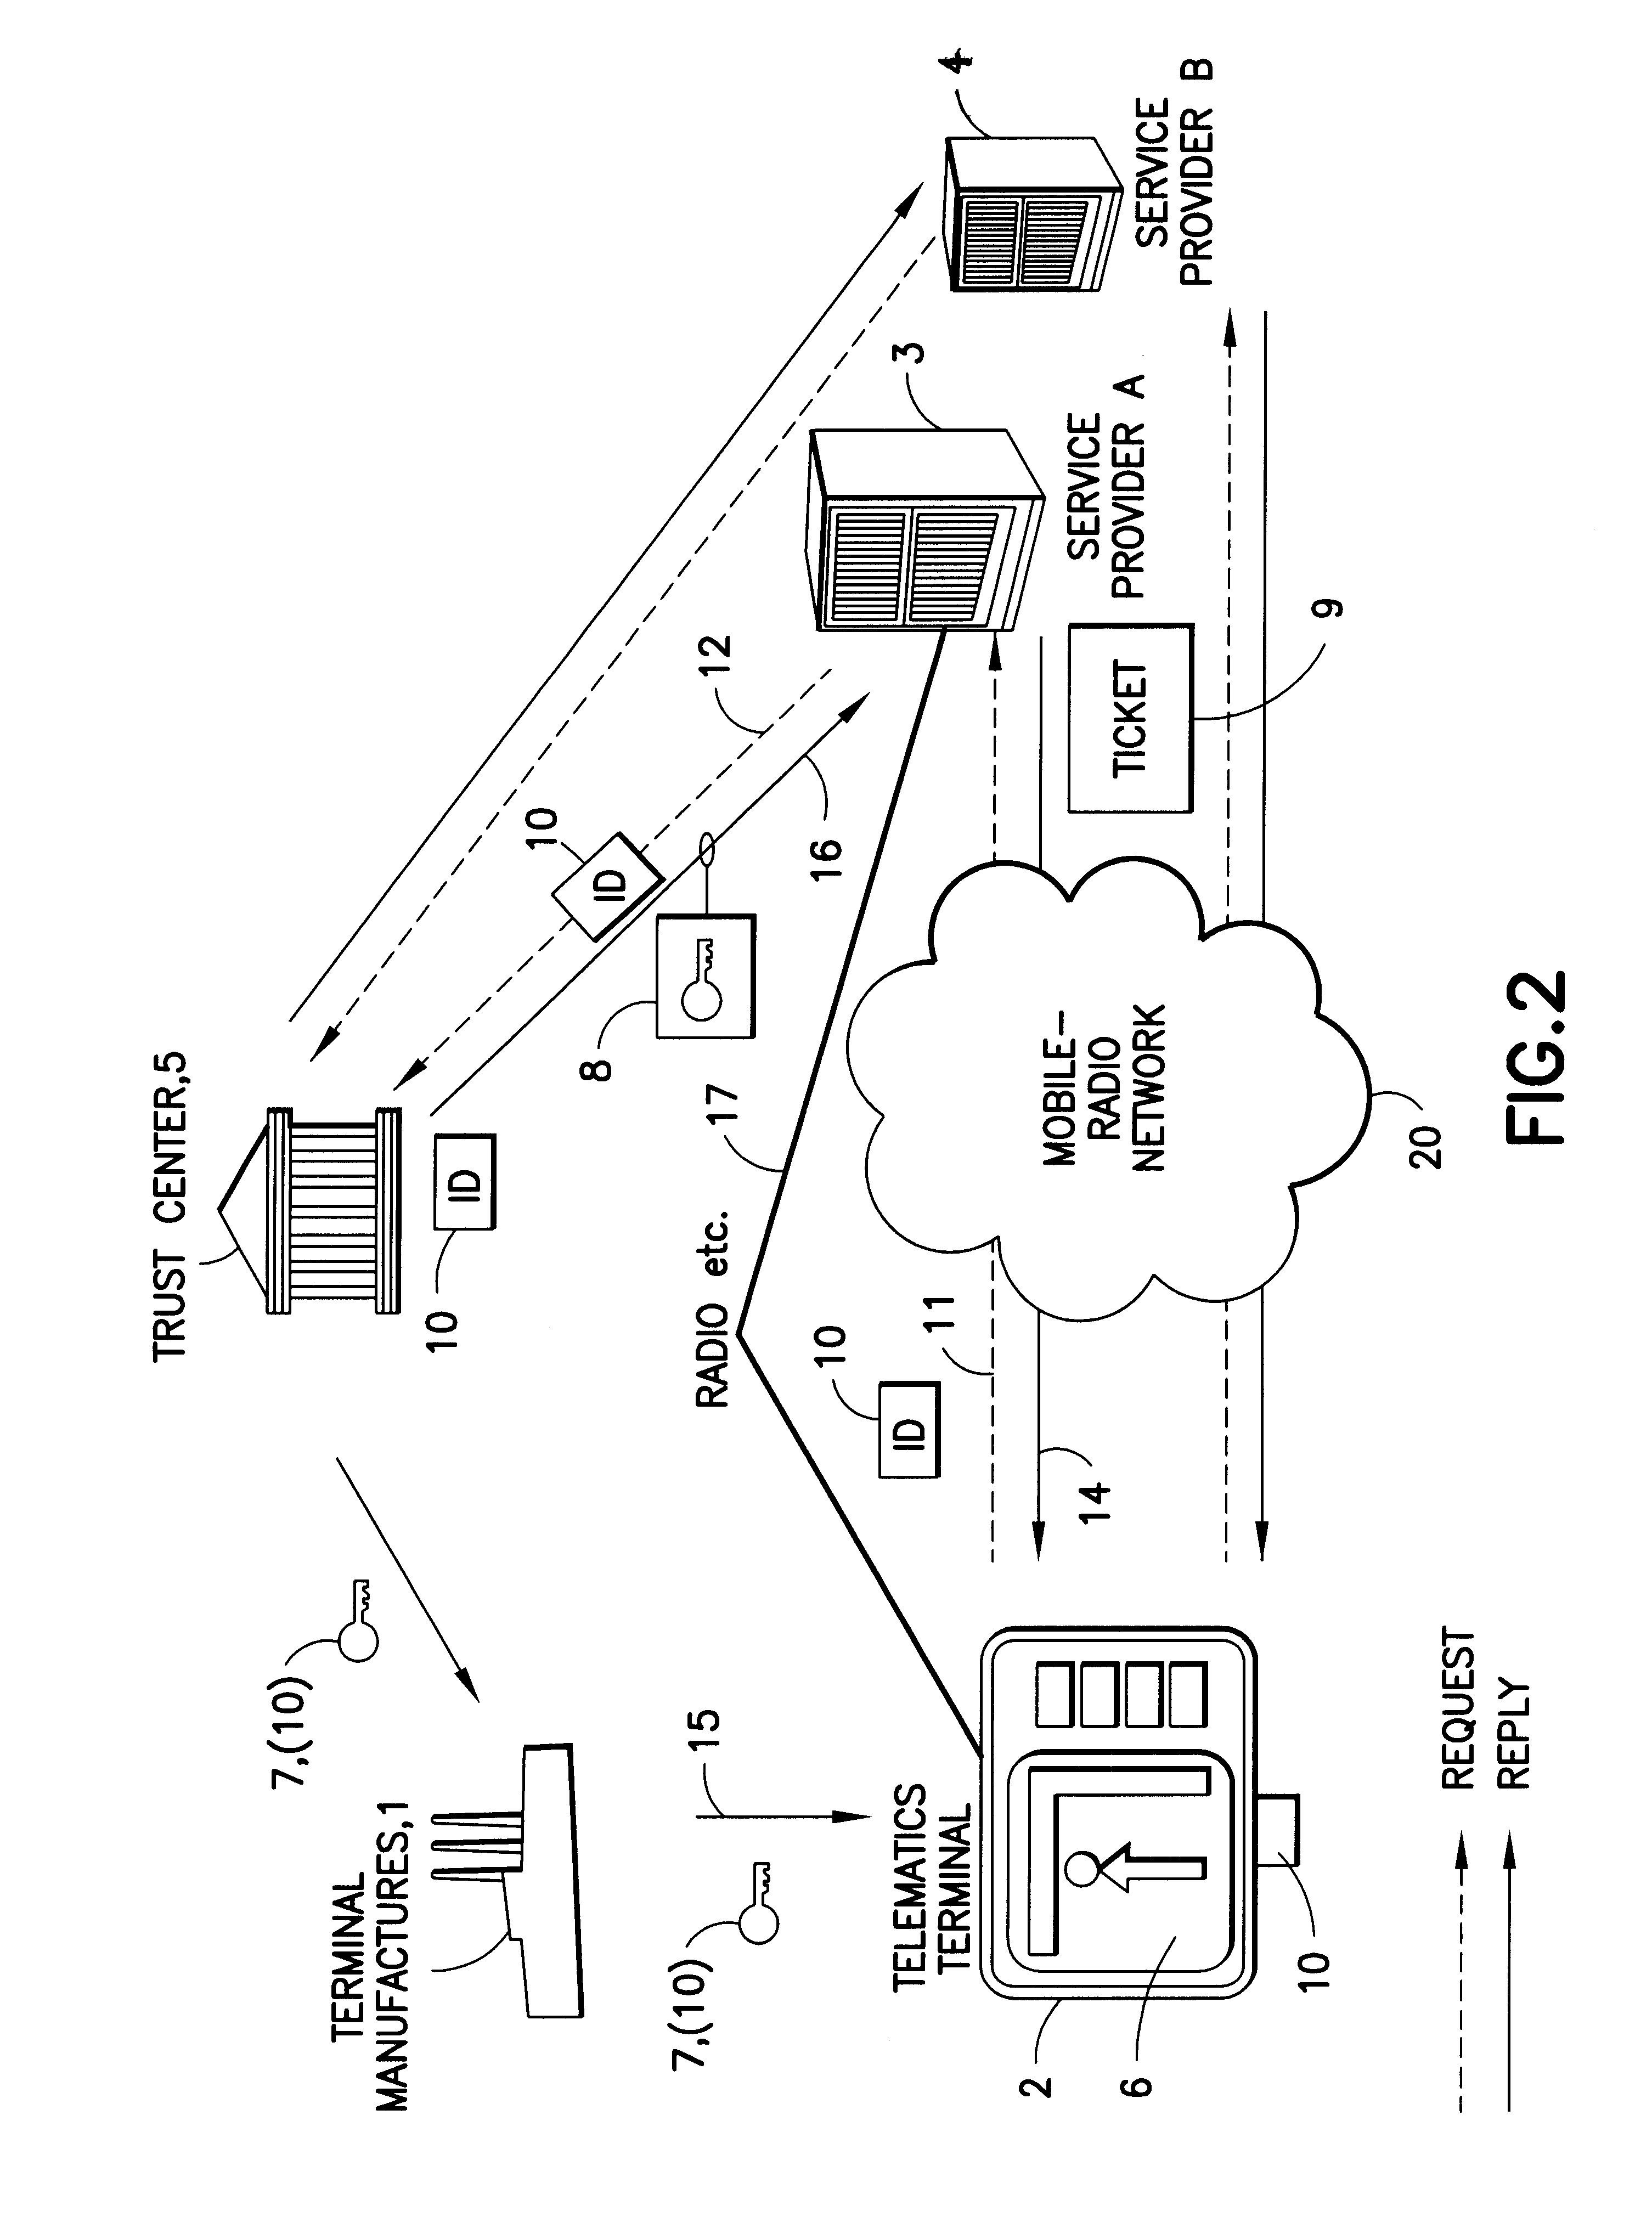 Method for inserting a service key in a terminal and devices for implementing said method